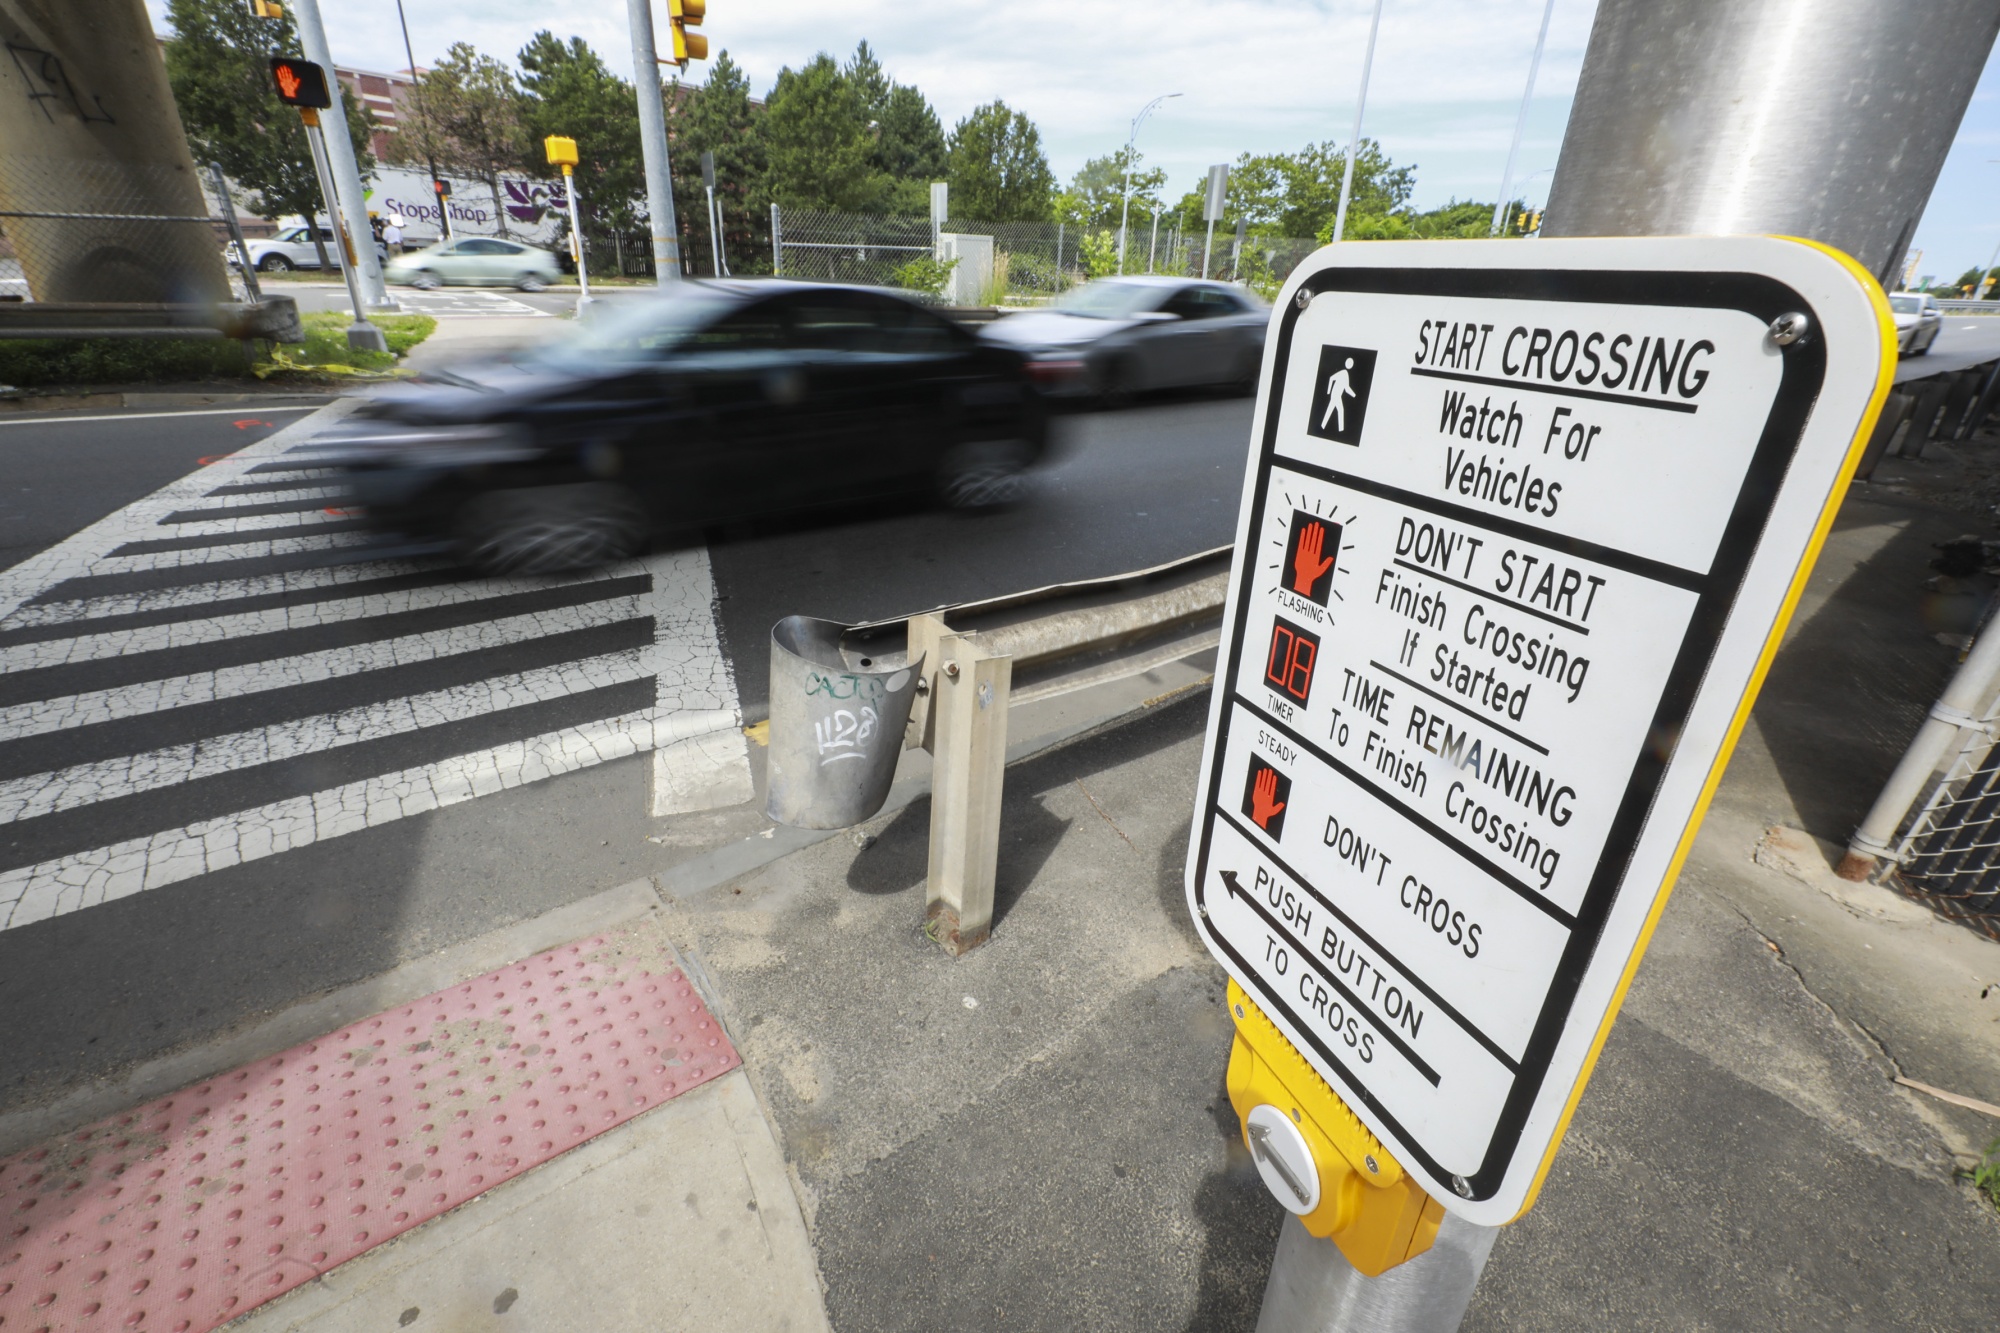 New York City: Are Pedestrian Crossings Safe for Blind People?